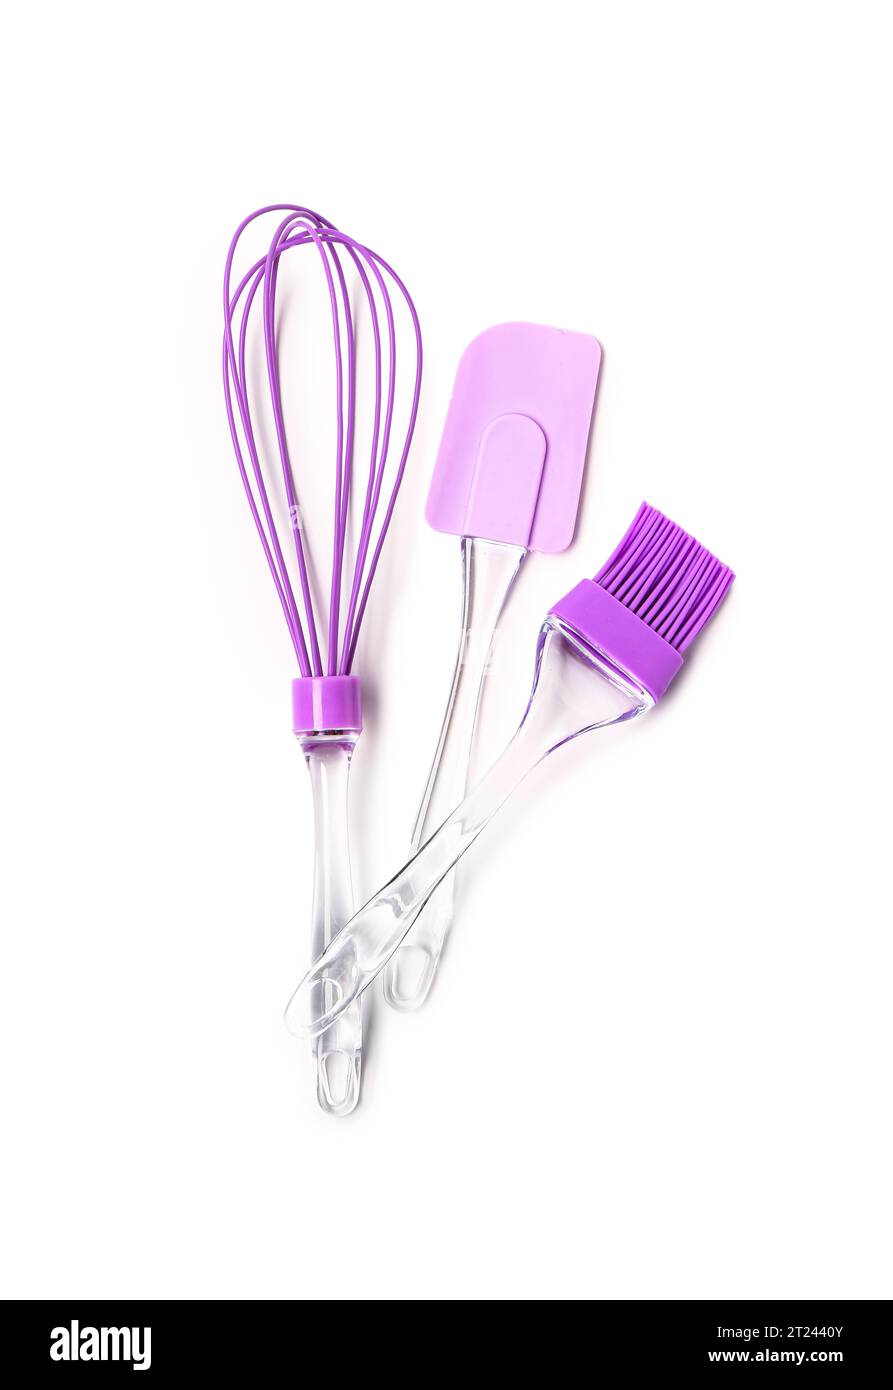 https://c8.alamy.com/comp/2T2440Y/pastry-brush-whisk-and-spatula-isolated-on-white-background-2T2440Y.jpg